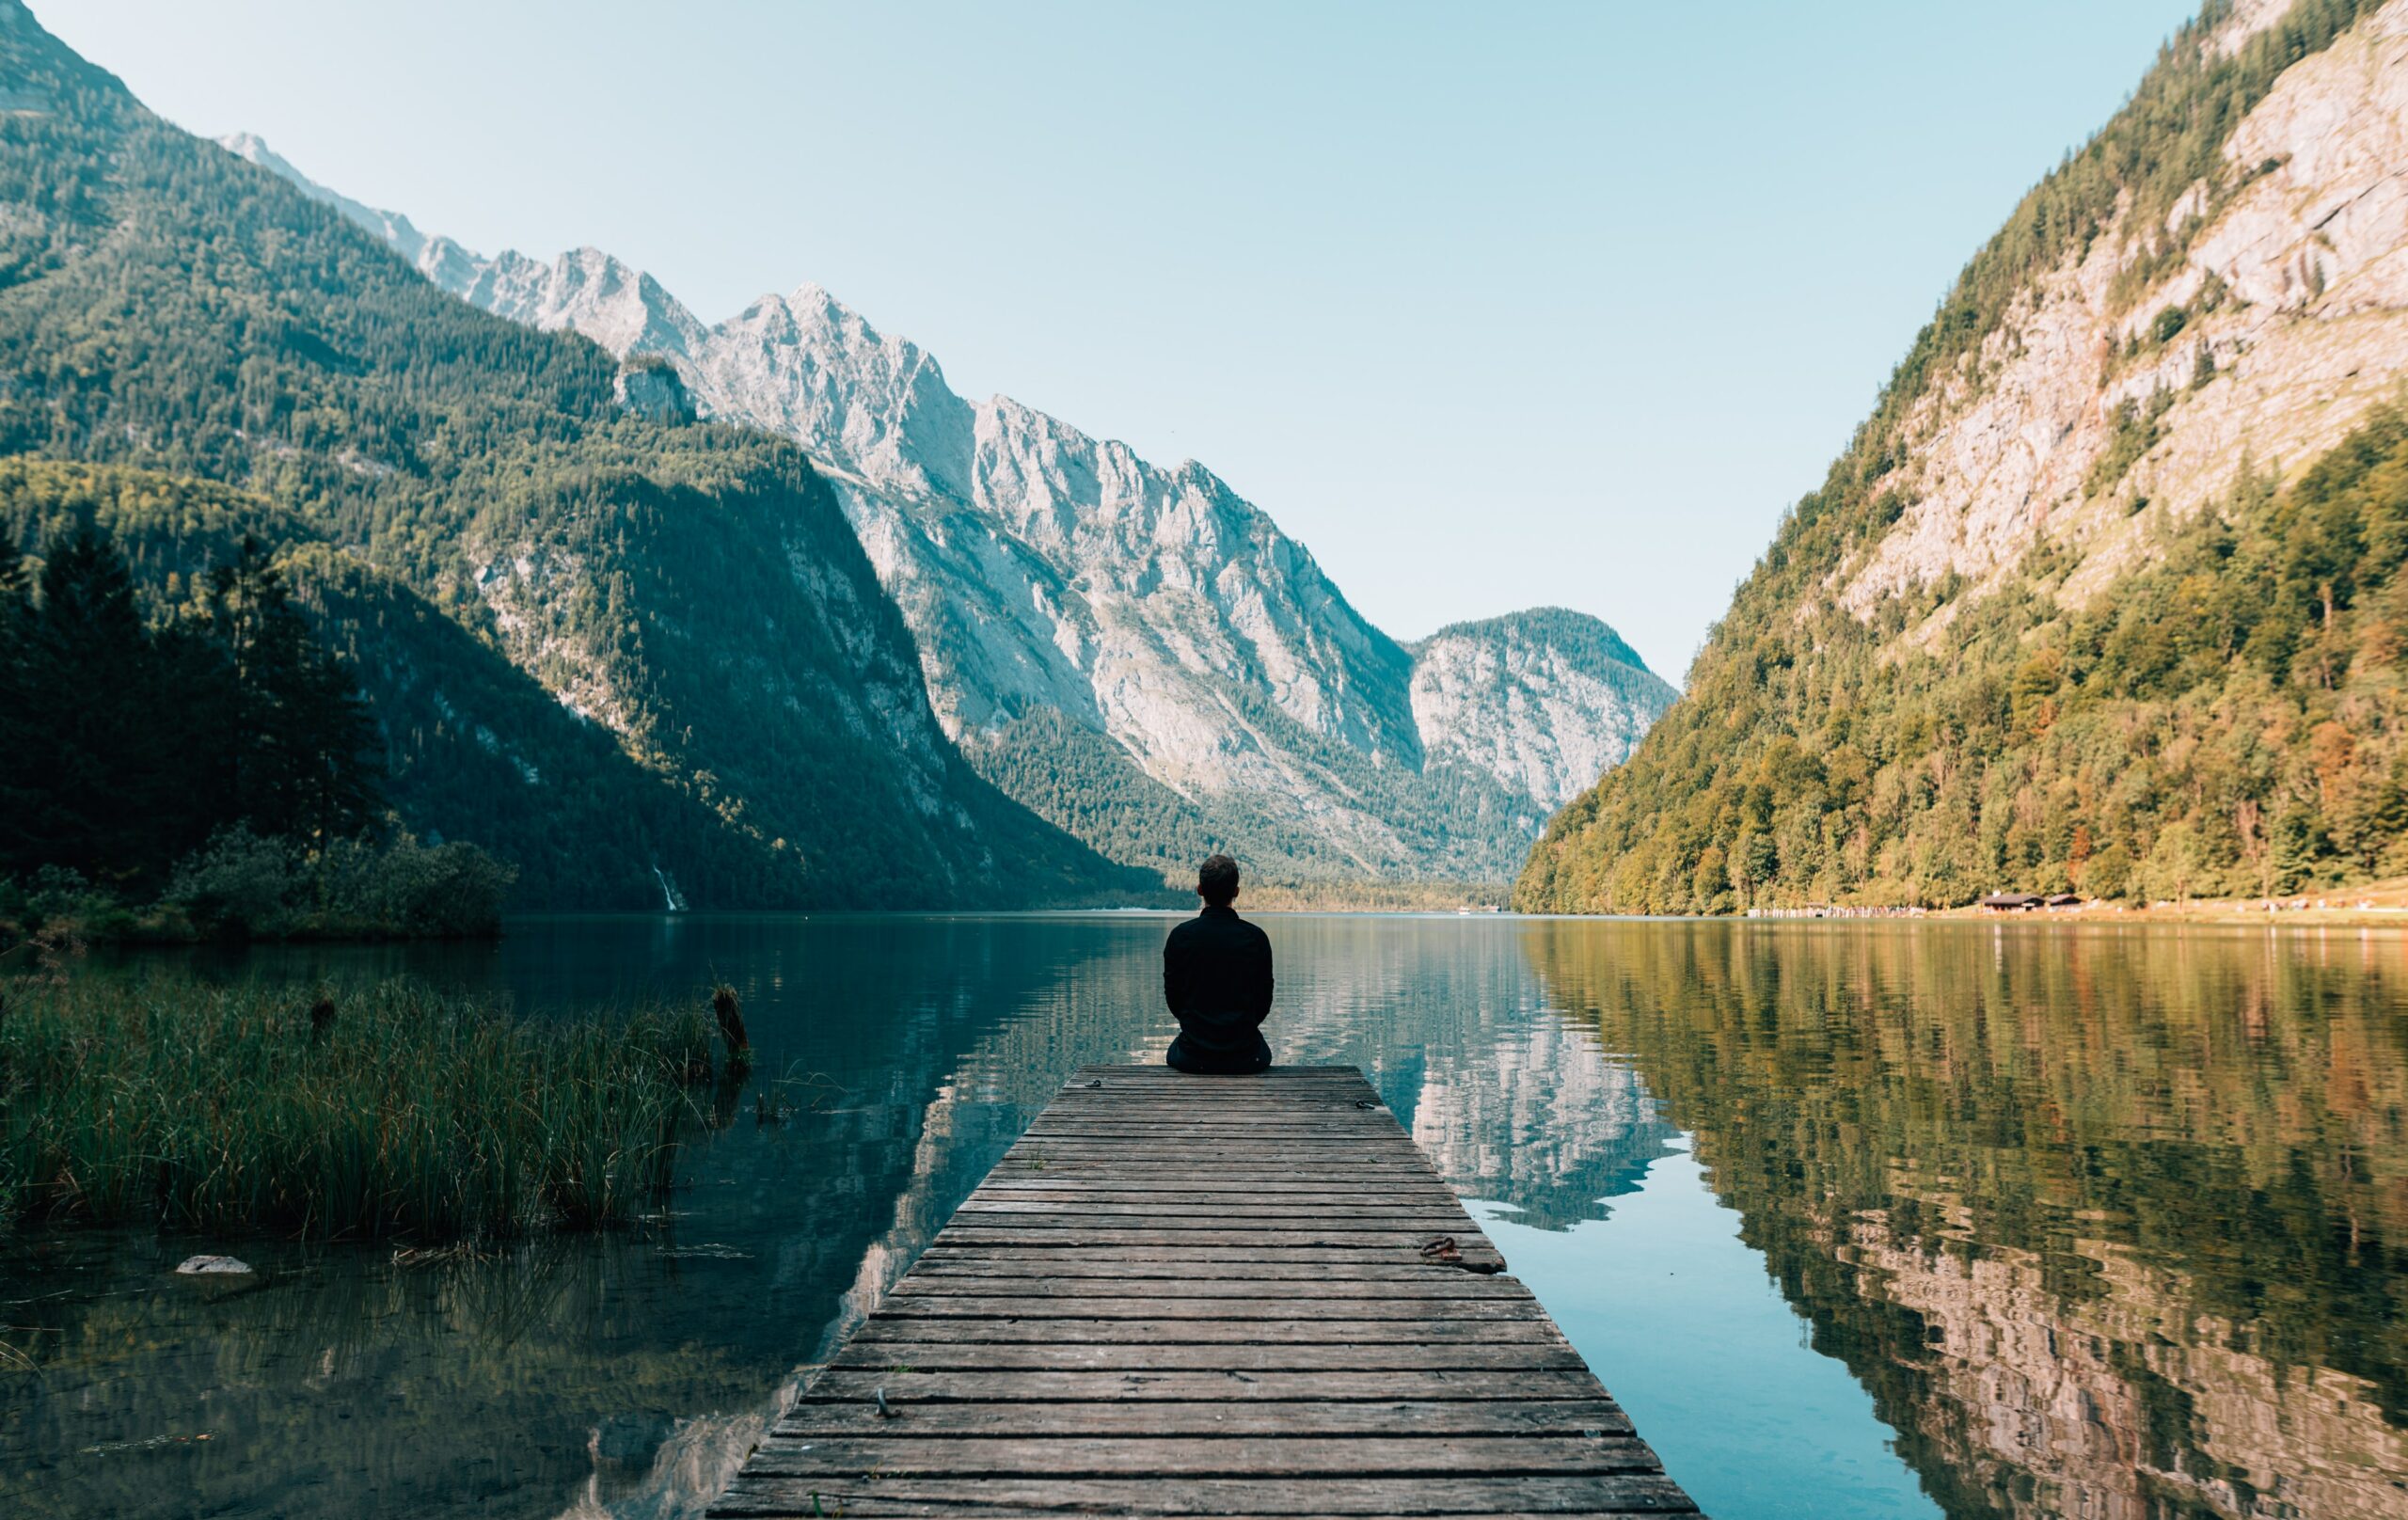 man sitting on boardwalk staring at the mountains and water around him